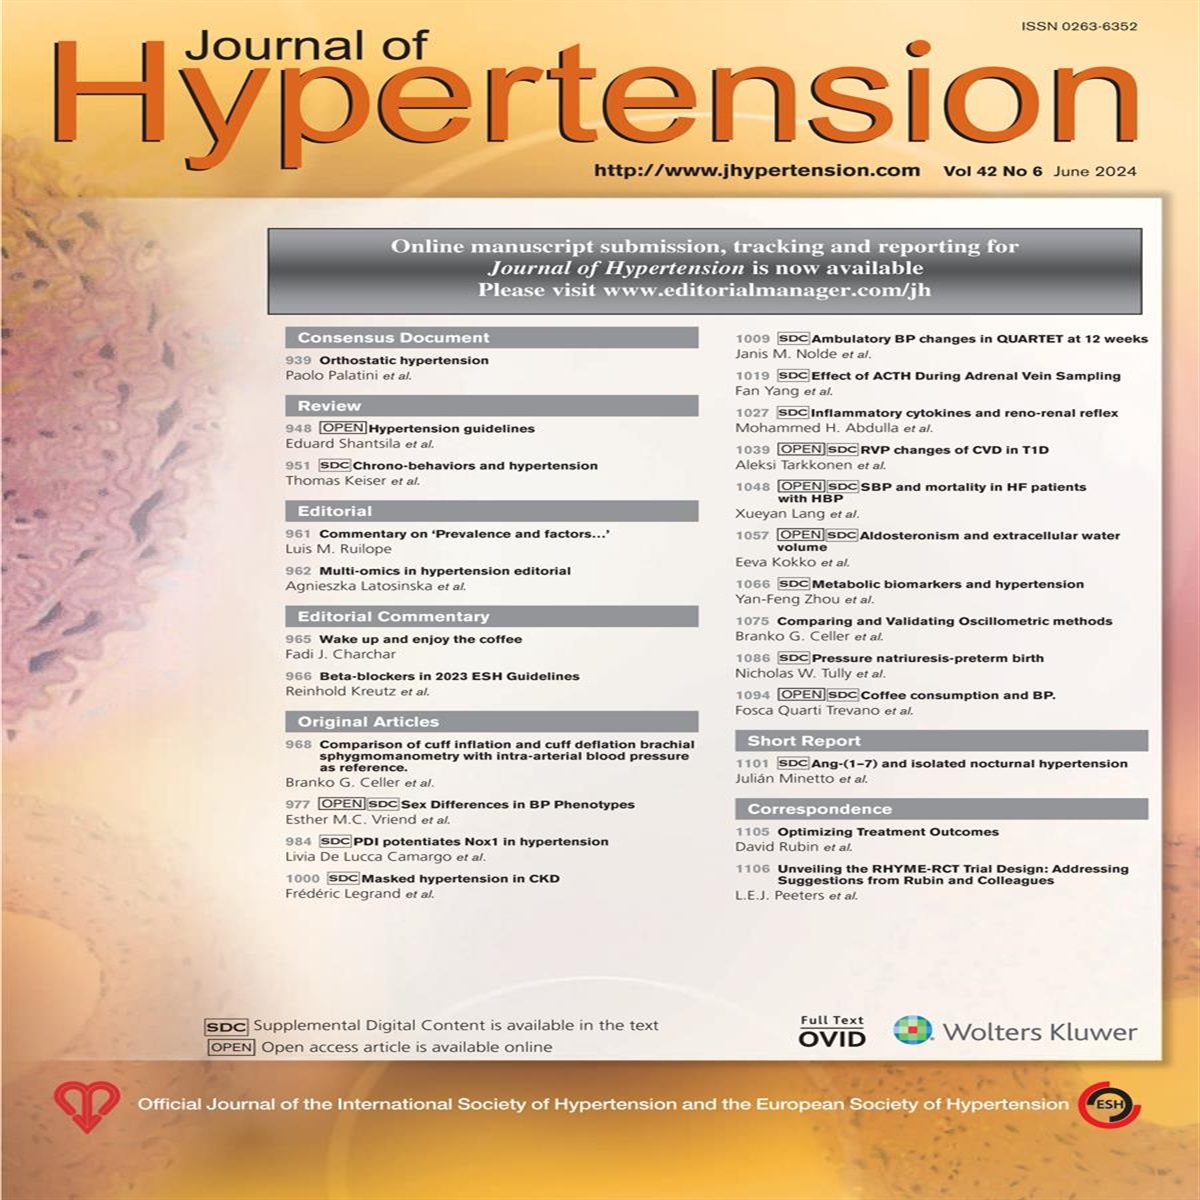 Optimizing treatment outcomes: integrating antihypertensive drug concentration measurement, personalized feedback, and psychosocial factors in resistant hypertension